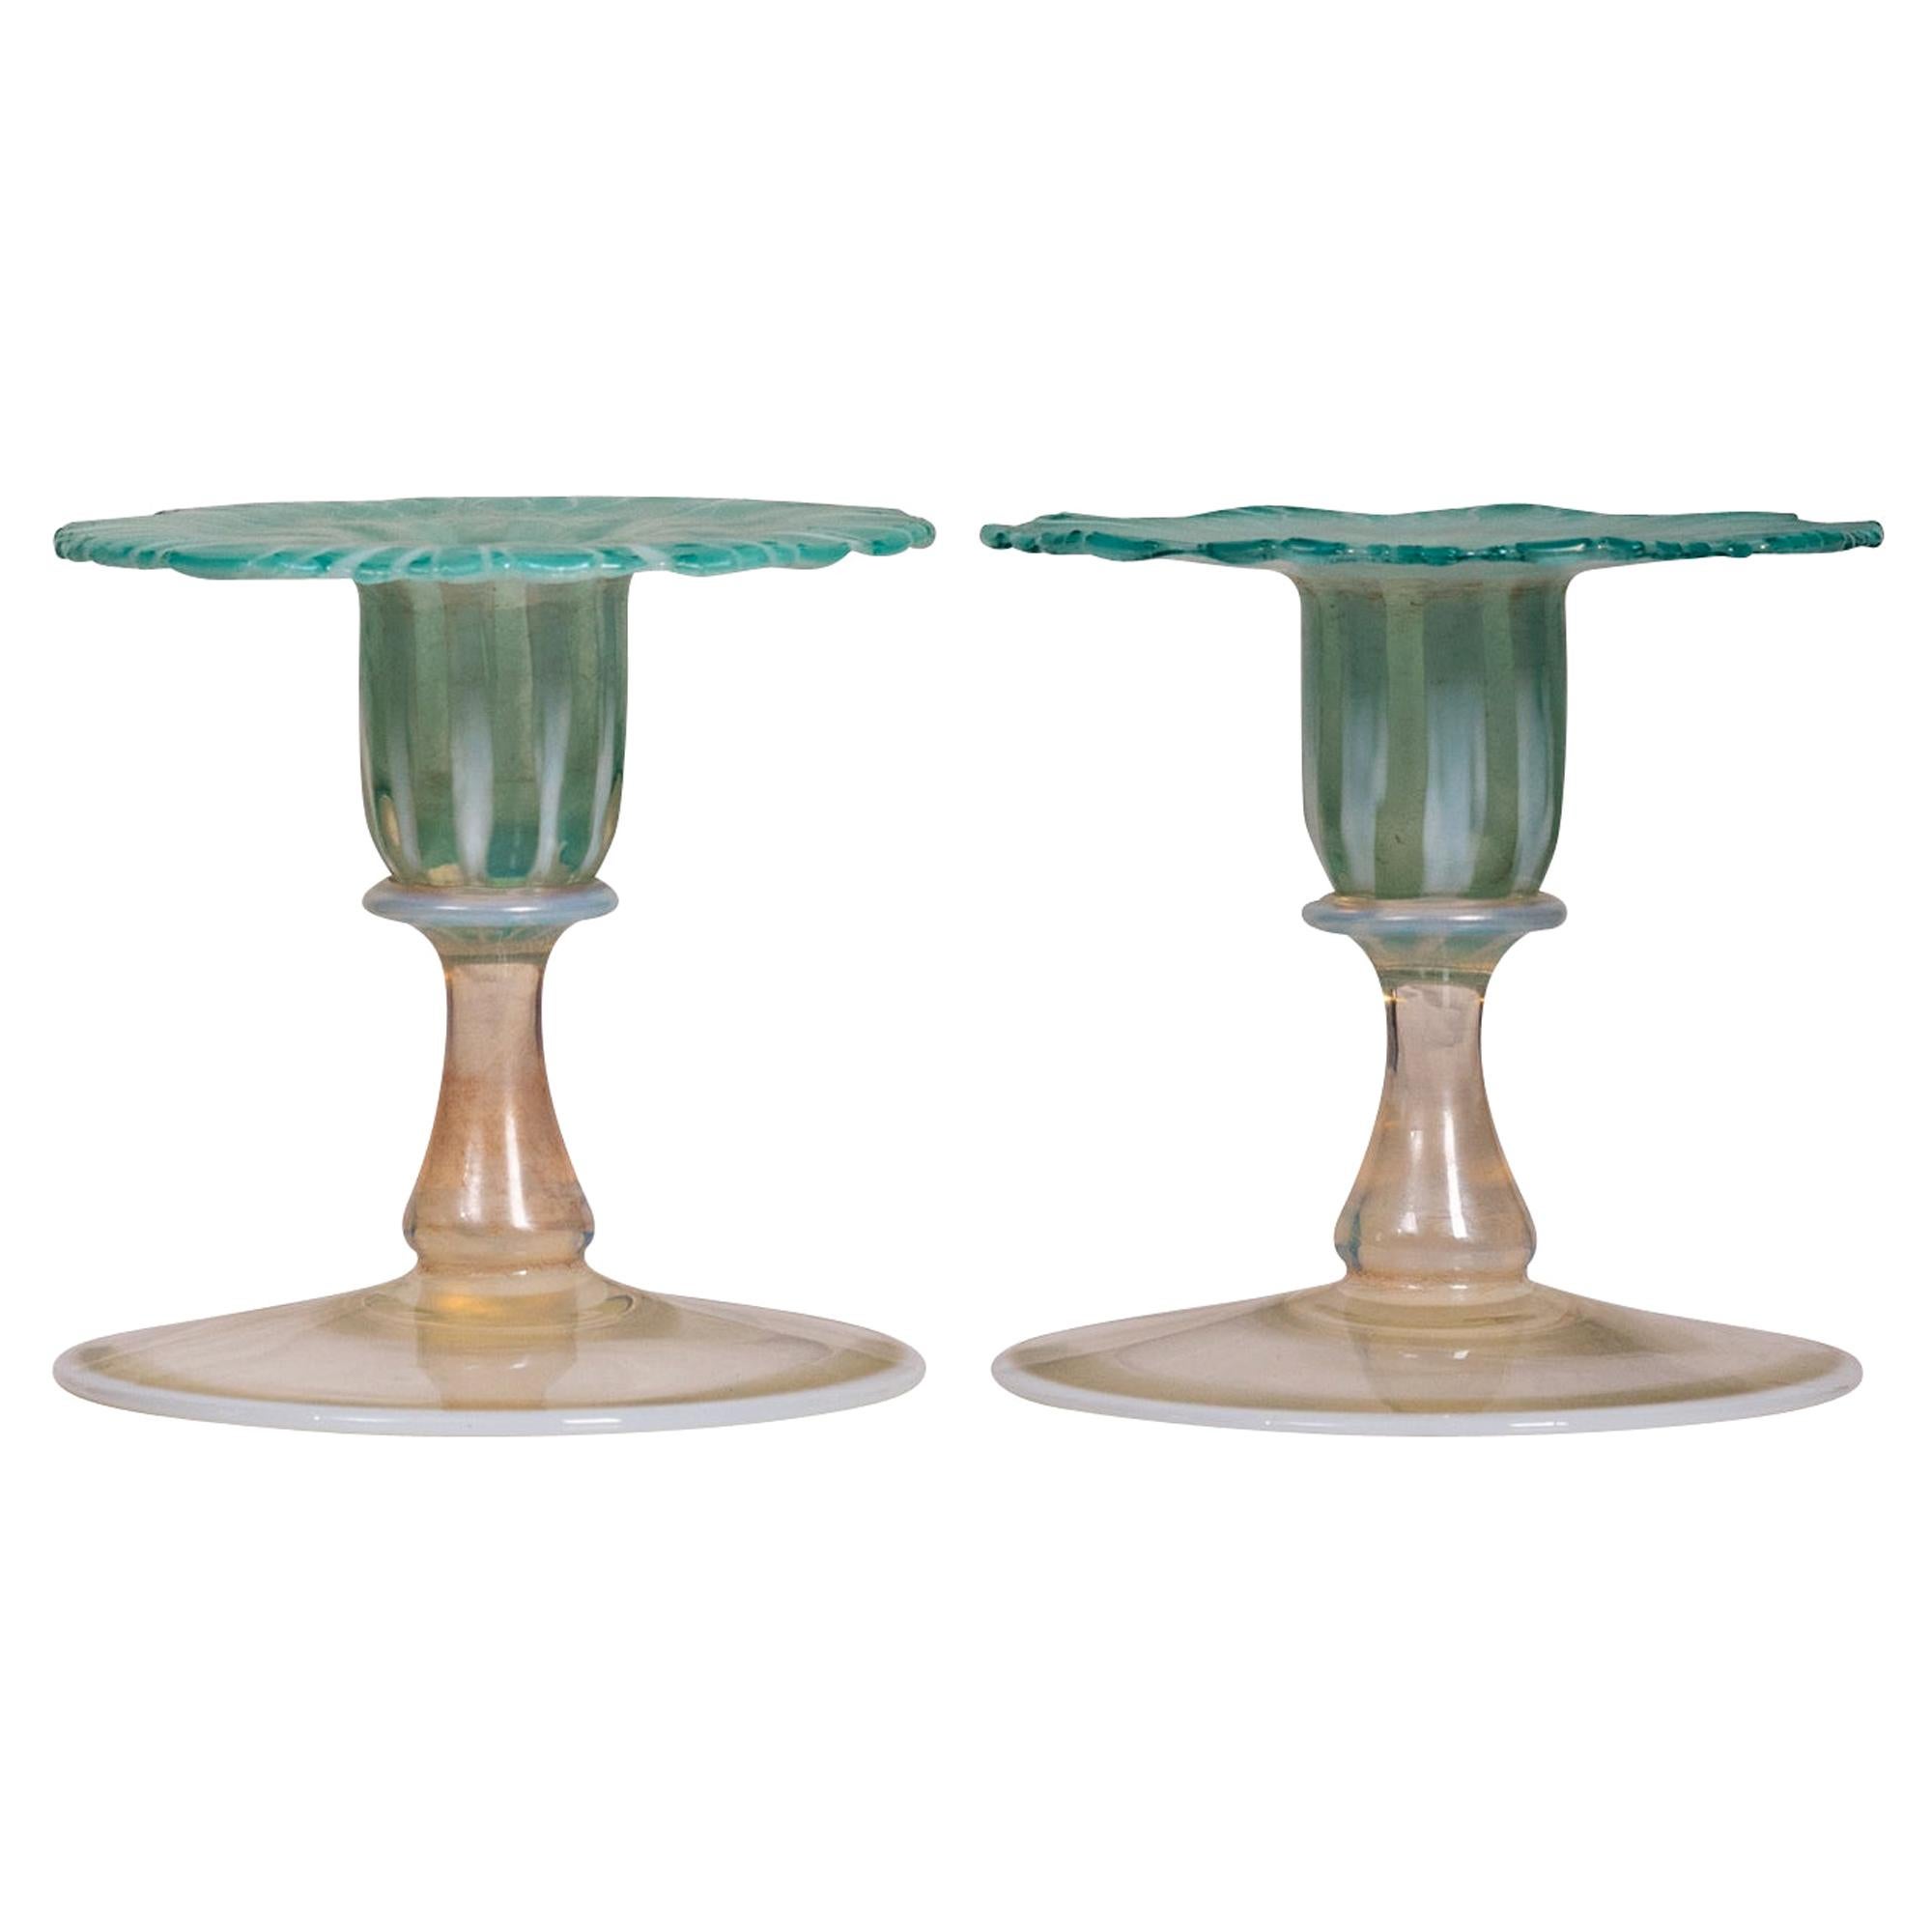 Pair of Tiffany Favrile Glass Morning Glory Candlesticks